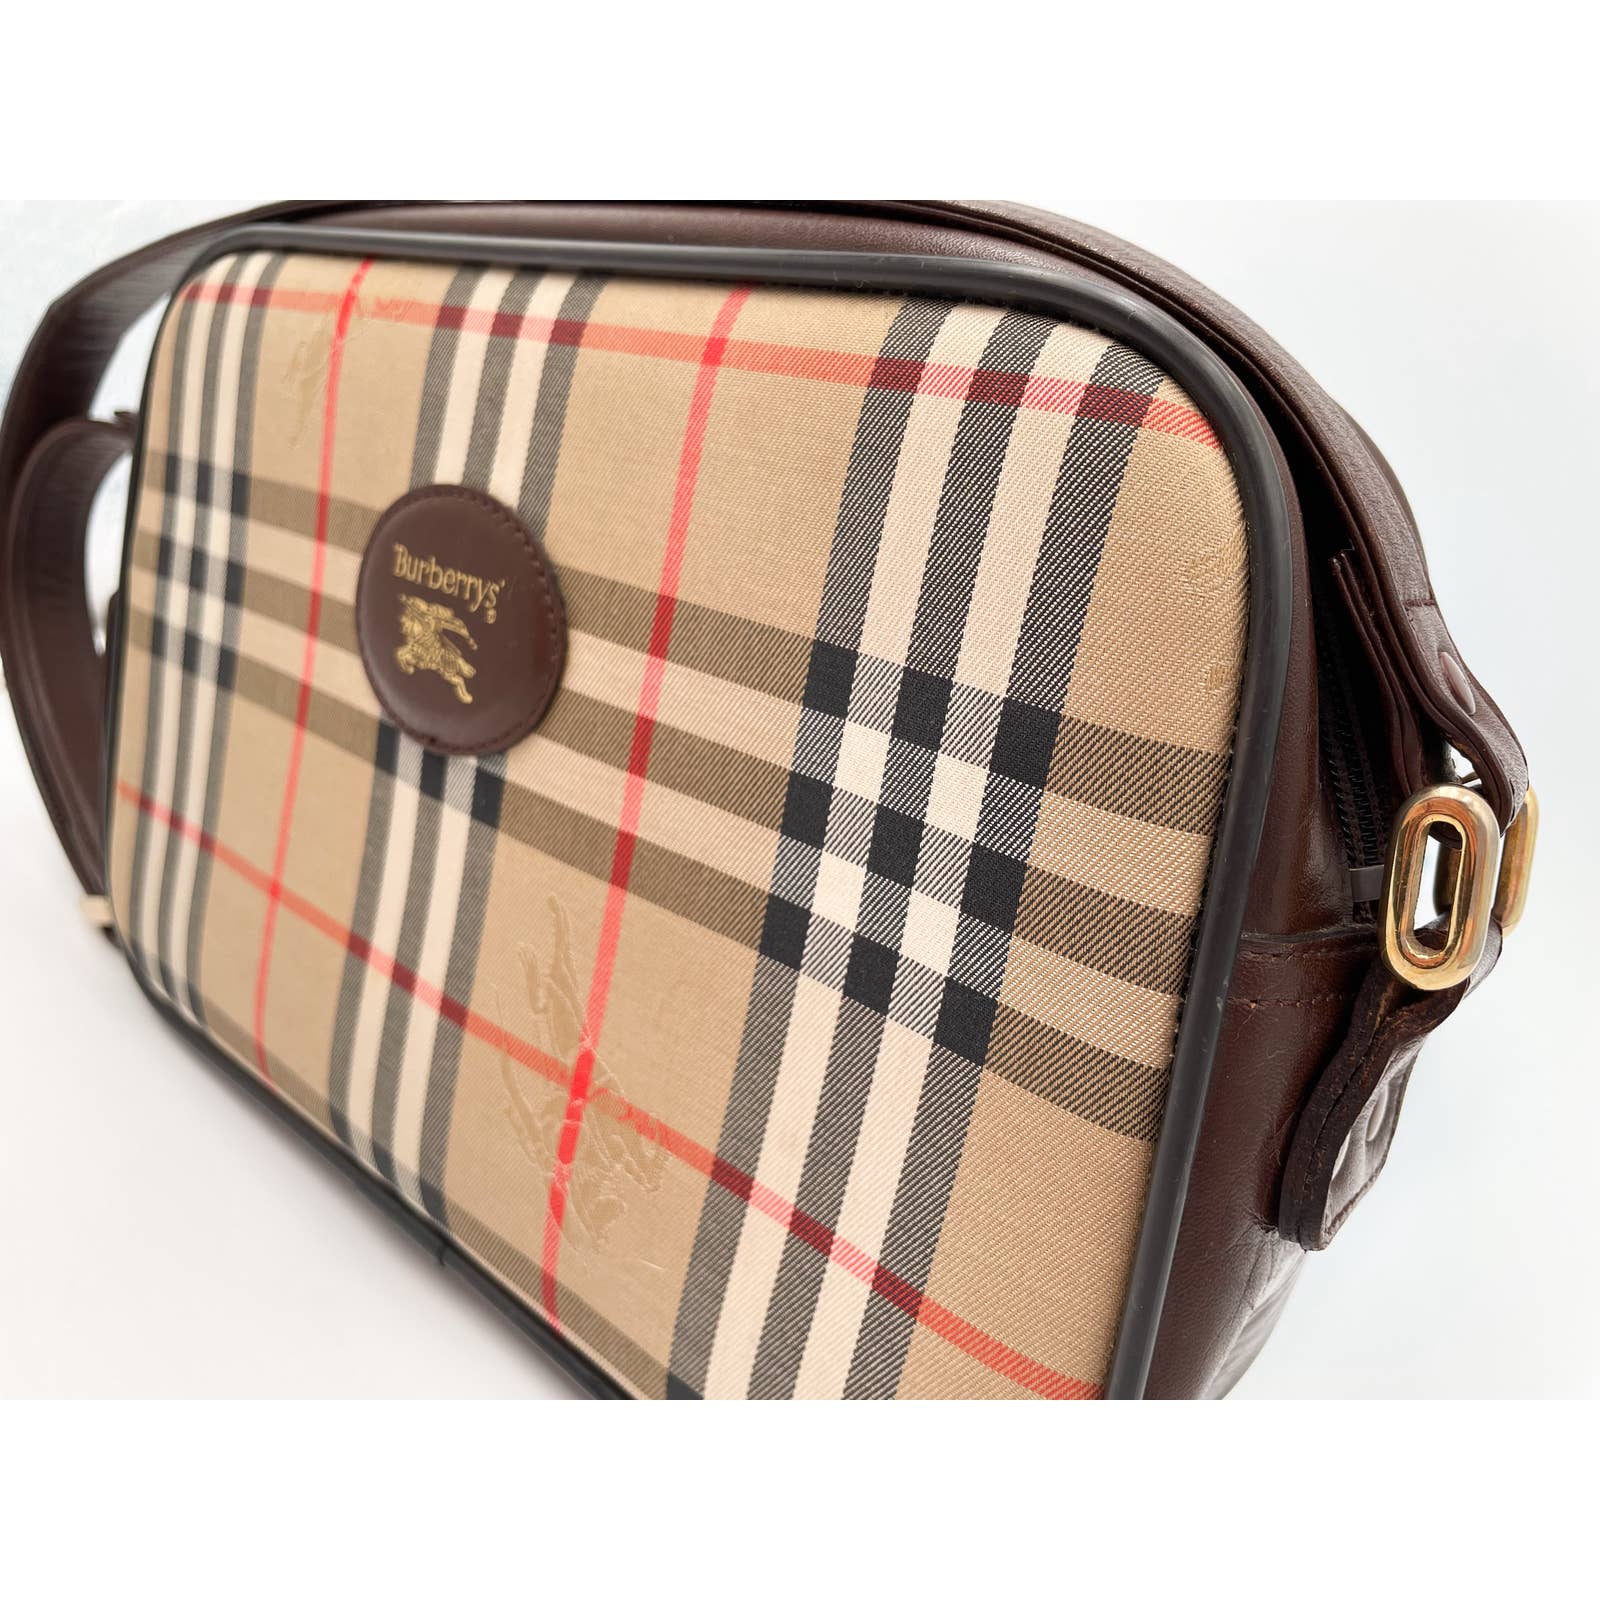 A Burberry Crossbody Bag featuring the brand's signature beige, black, red, and white plaid pattern. The bag has dark brown leather wear and an adjustable strap, with a close-up view of the Burberry logo embossed on a leather patch on the front.